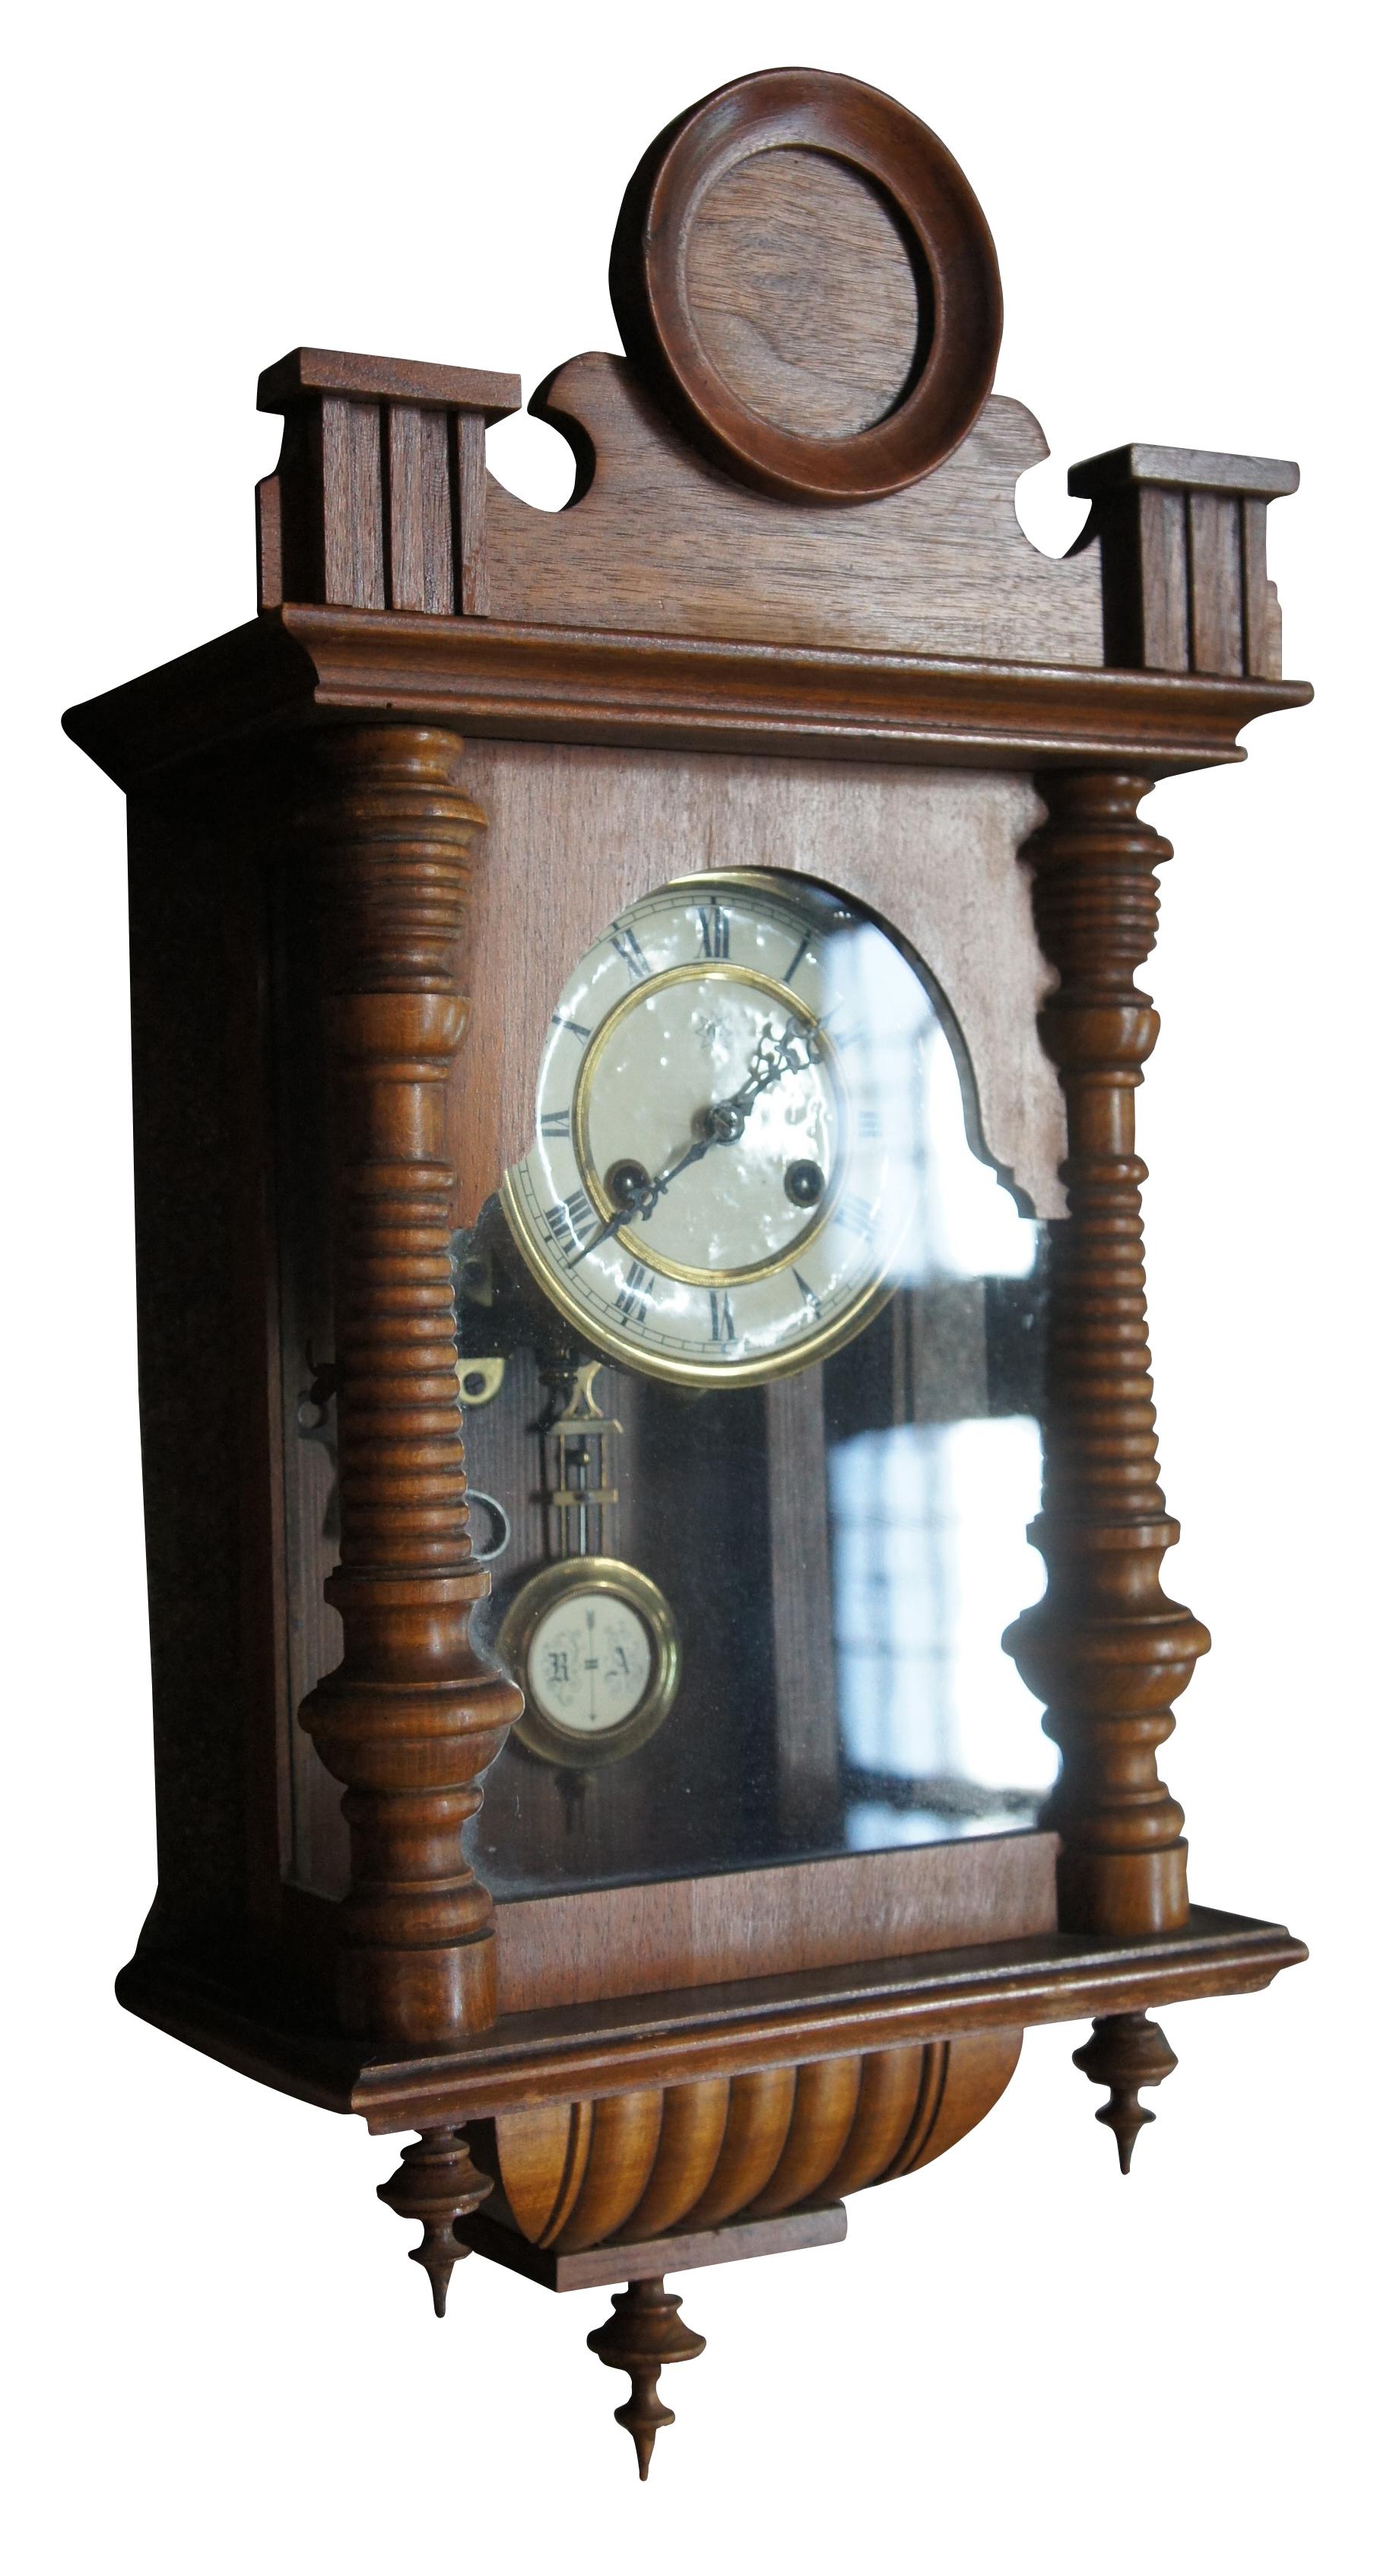 Antique German wall mounted Vienna Regulator clock by Junghans in a walnut case with ribbed / turned accents, drop finials, serpentine and circular crown and roman number face accented with brass.Good antique condition, wear and distressing